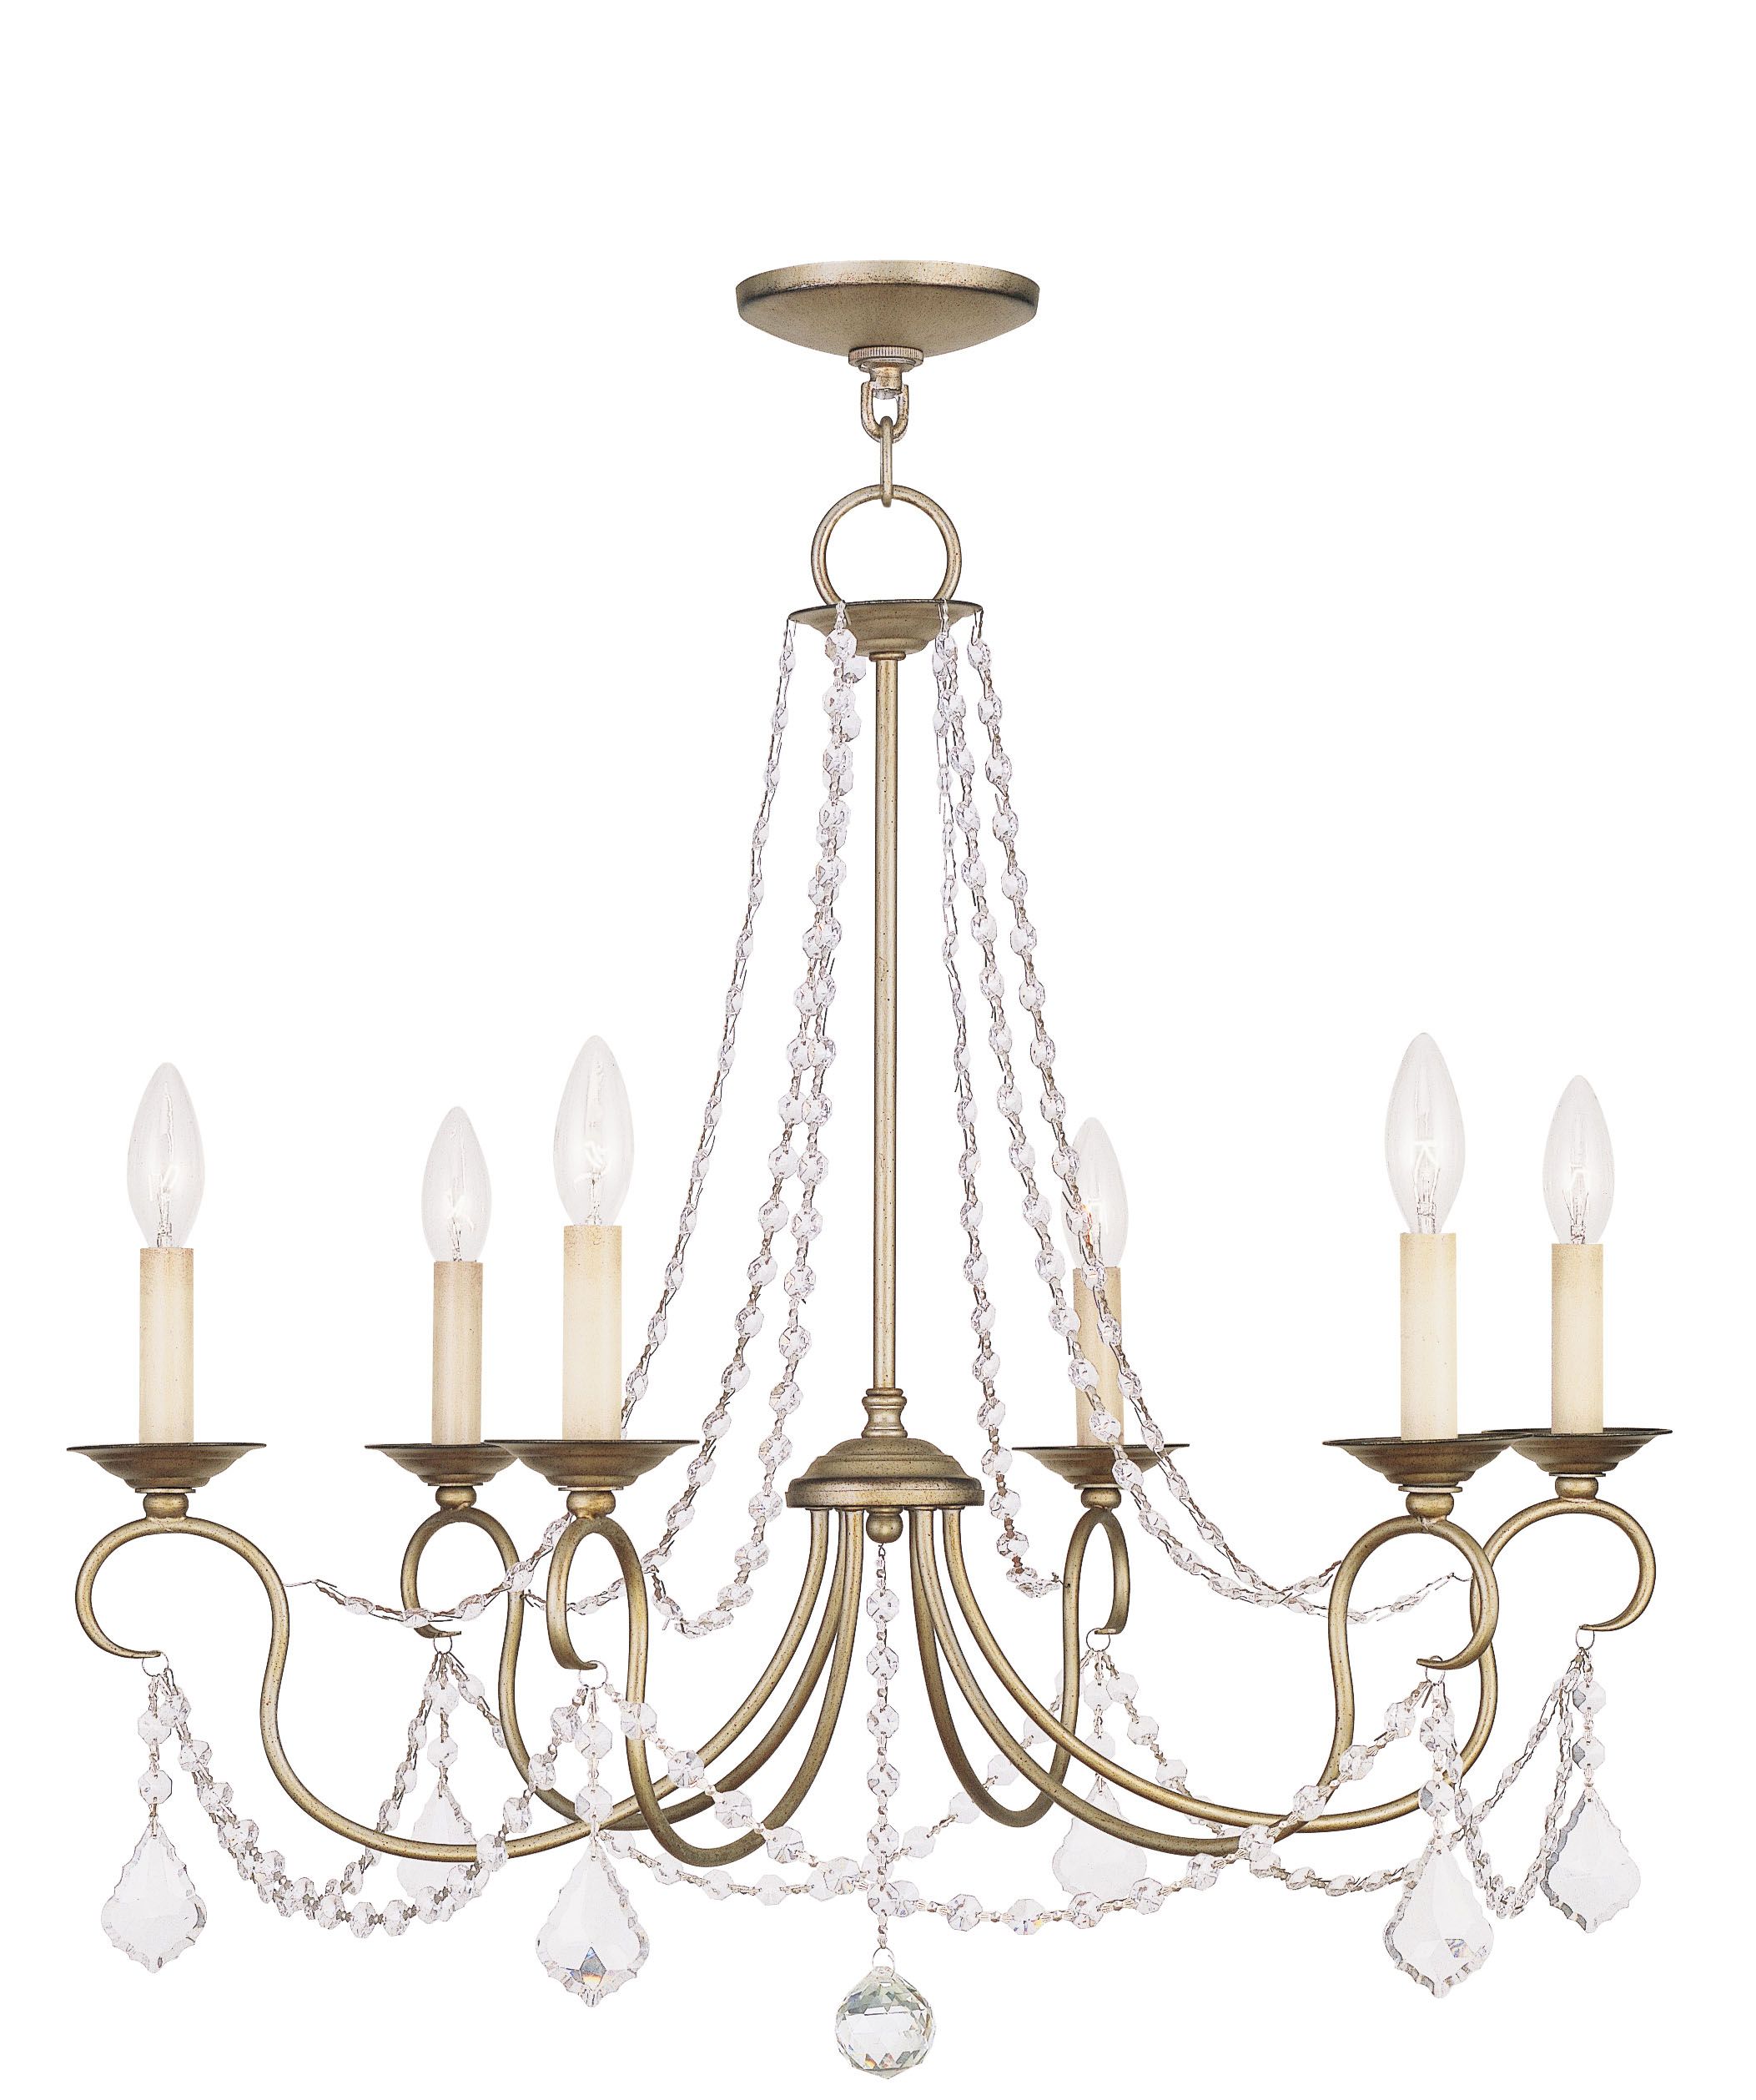 Livex Lighting Pennington Chandelier Hand Painted Antique With Four Light Antique Silver Chandeliers (View 5 of 15)